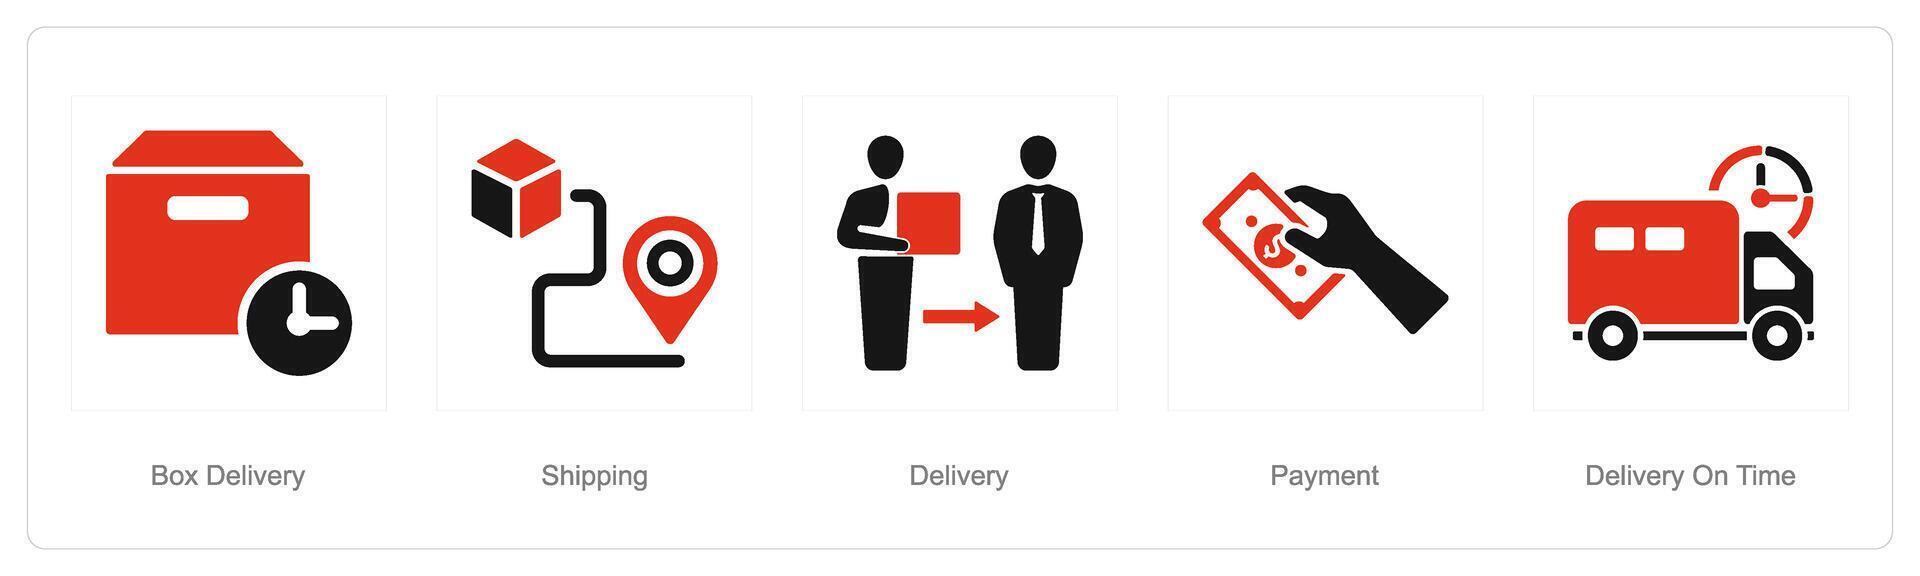 A set of 5 delivery icons as box delivery, shipping, delivery vector